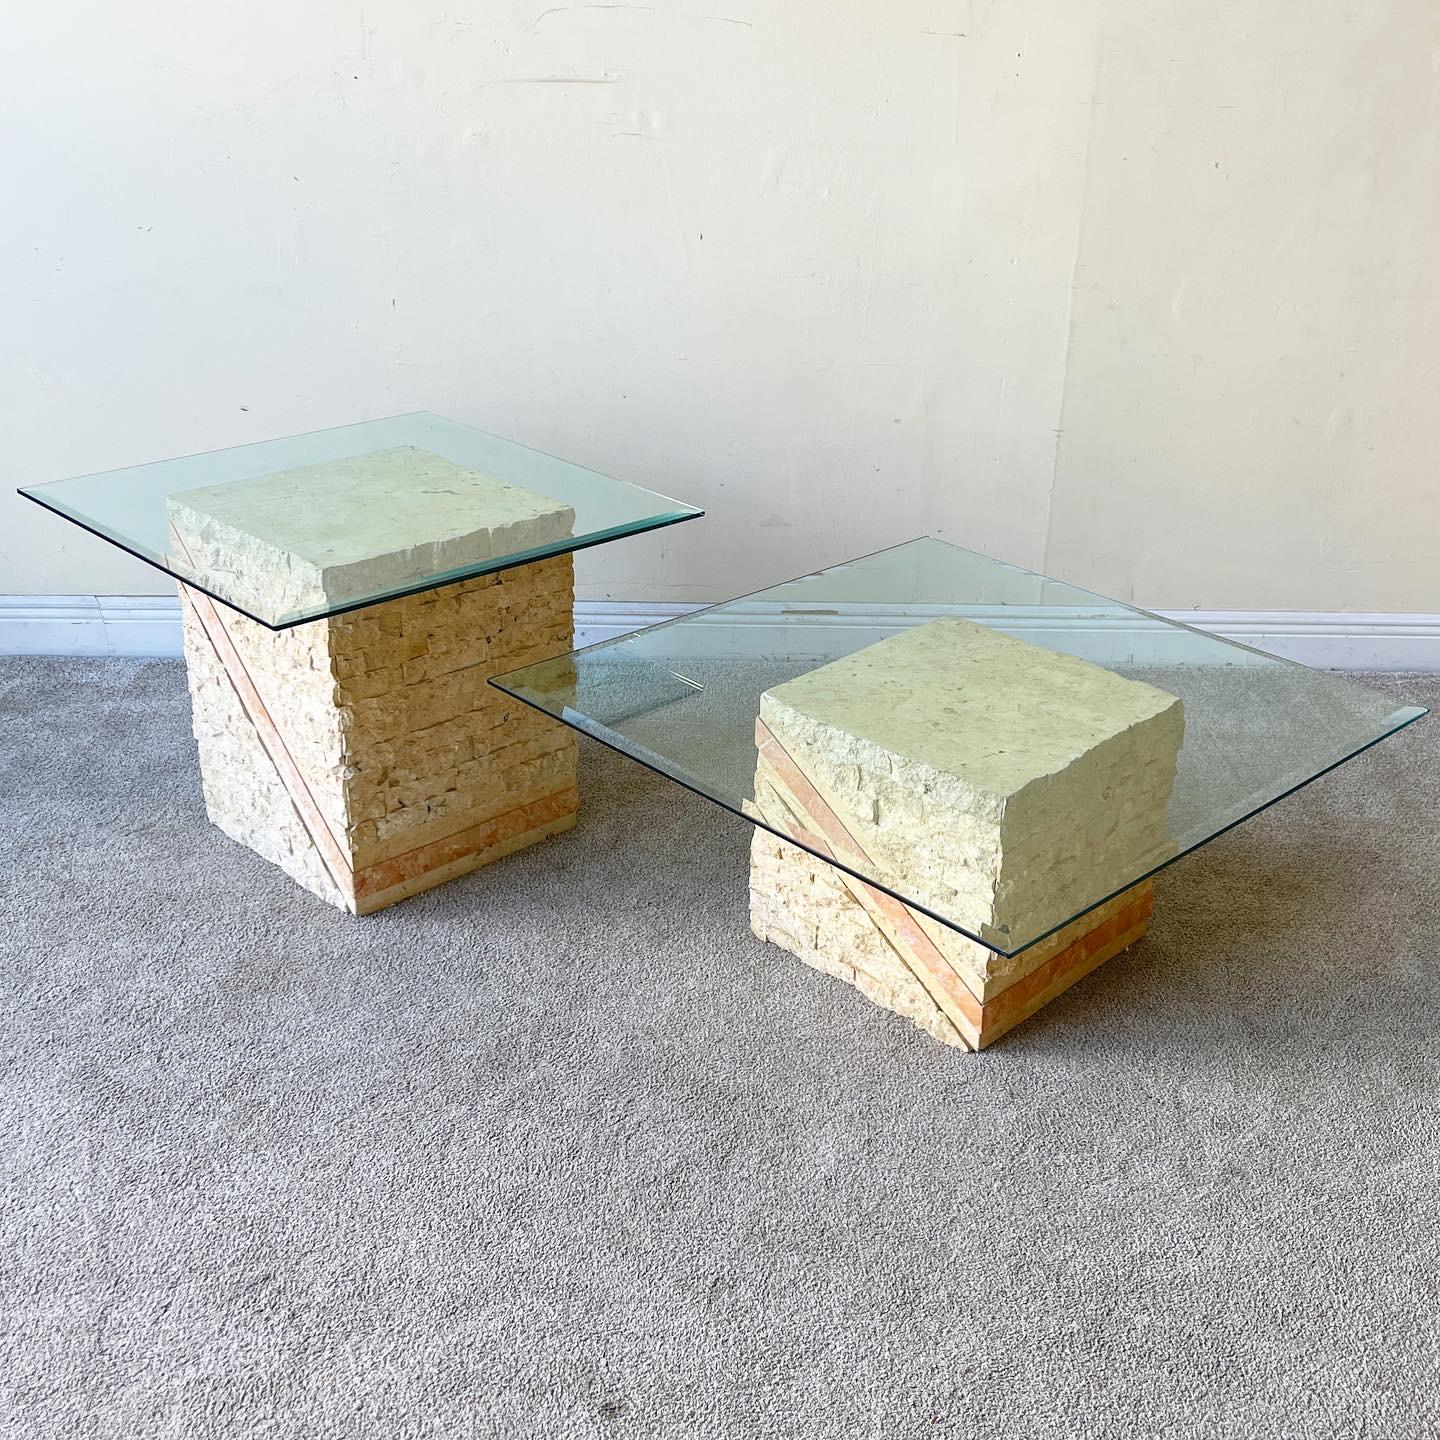 Amazing coffee and side table set with square beveled glass tops. Bases of tables both feature a tessellated rough stone with a pink polished stone stripe.

Additional information:
Material: Stone
Color: Beige, Pink
Style: Postmodern
Time Period: